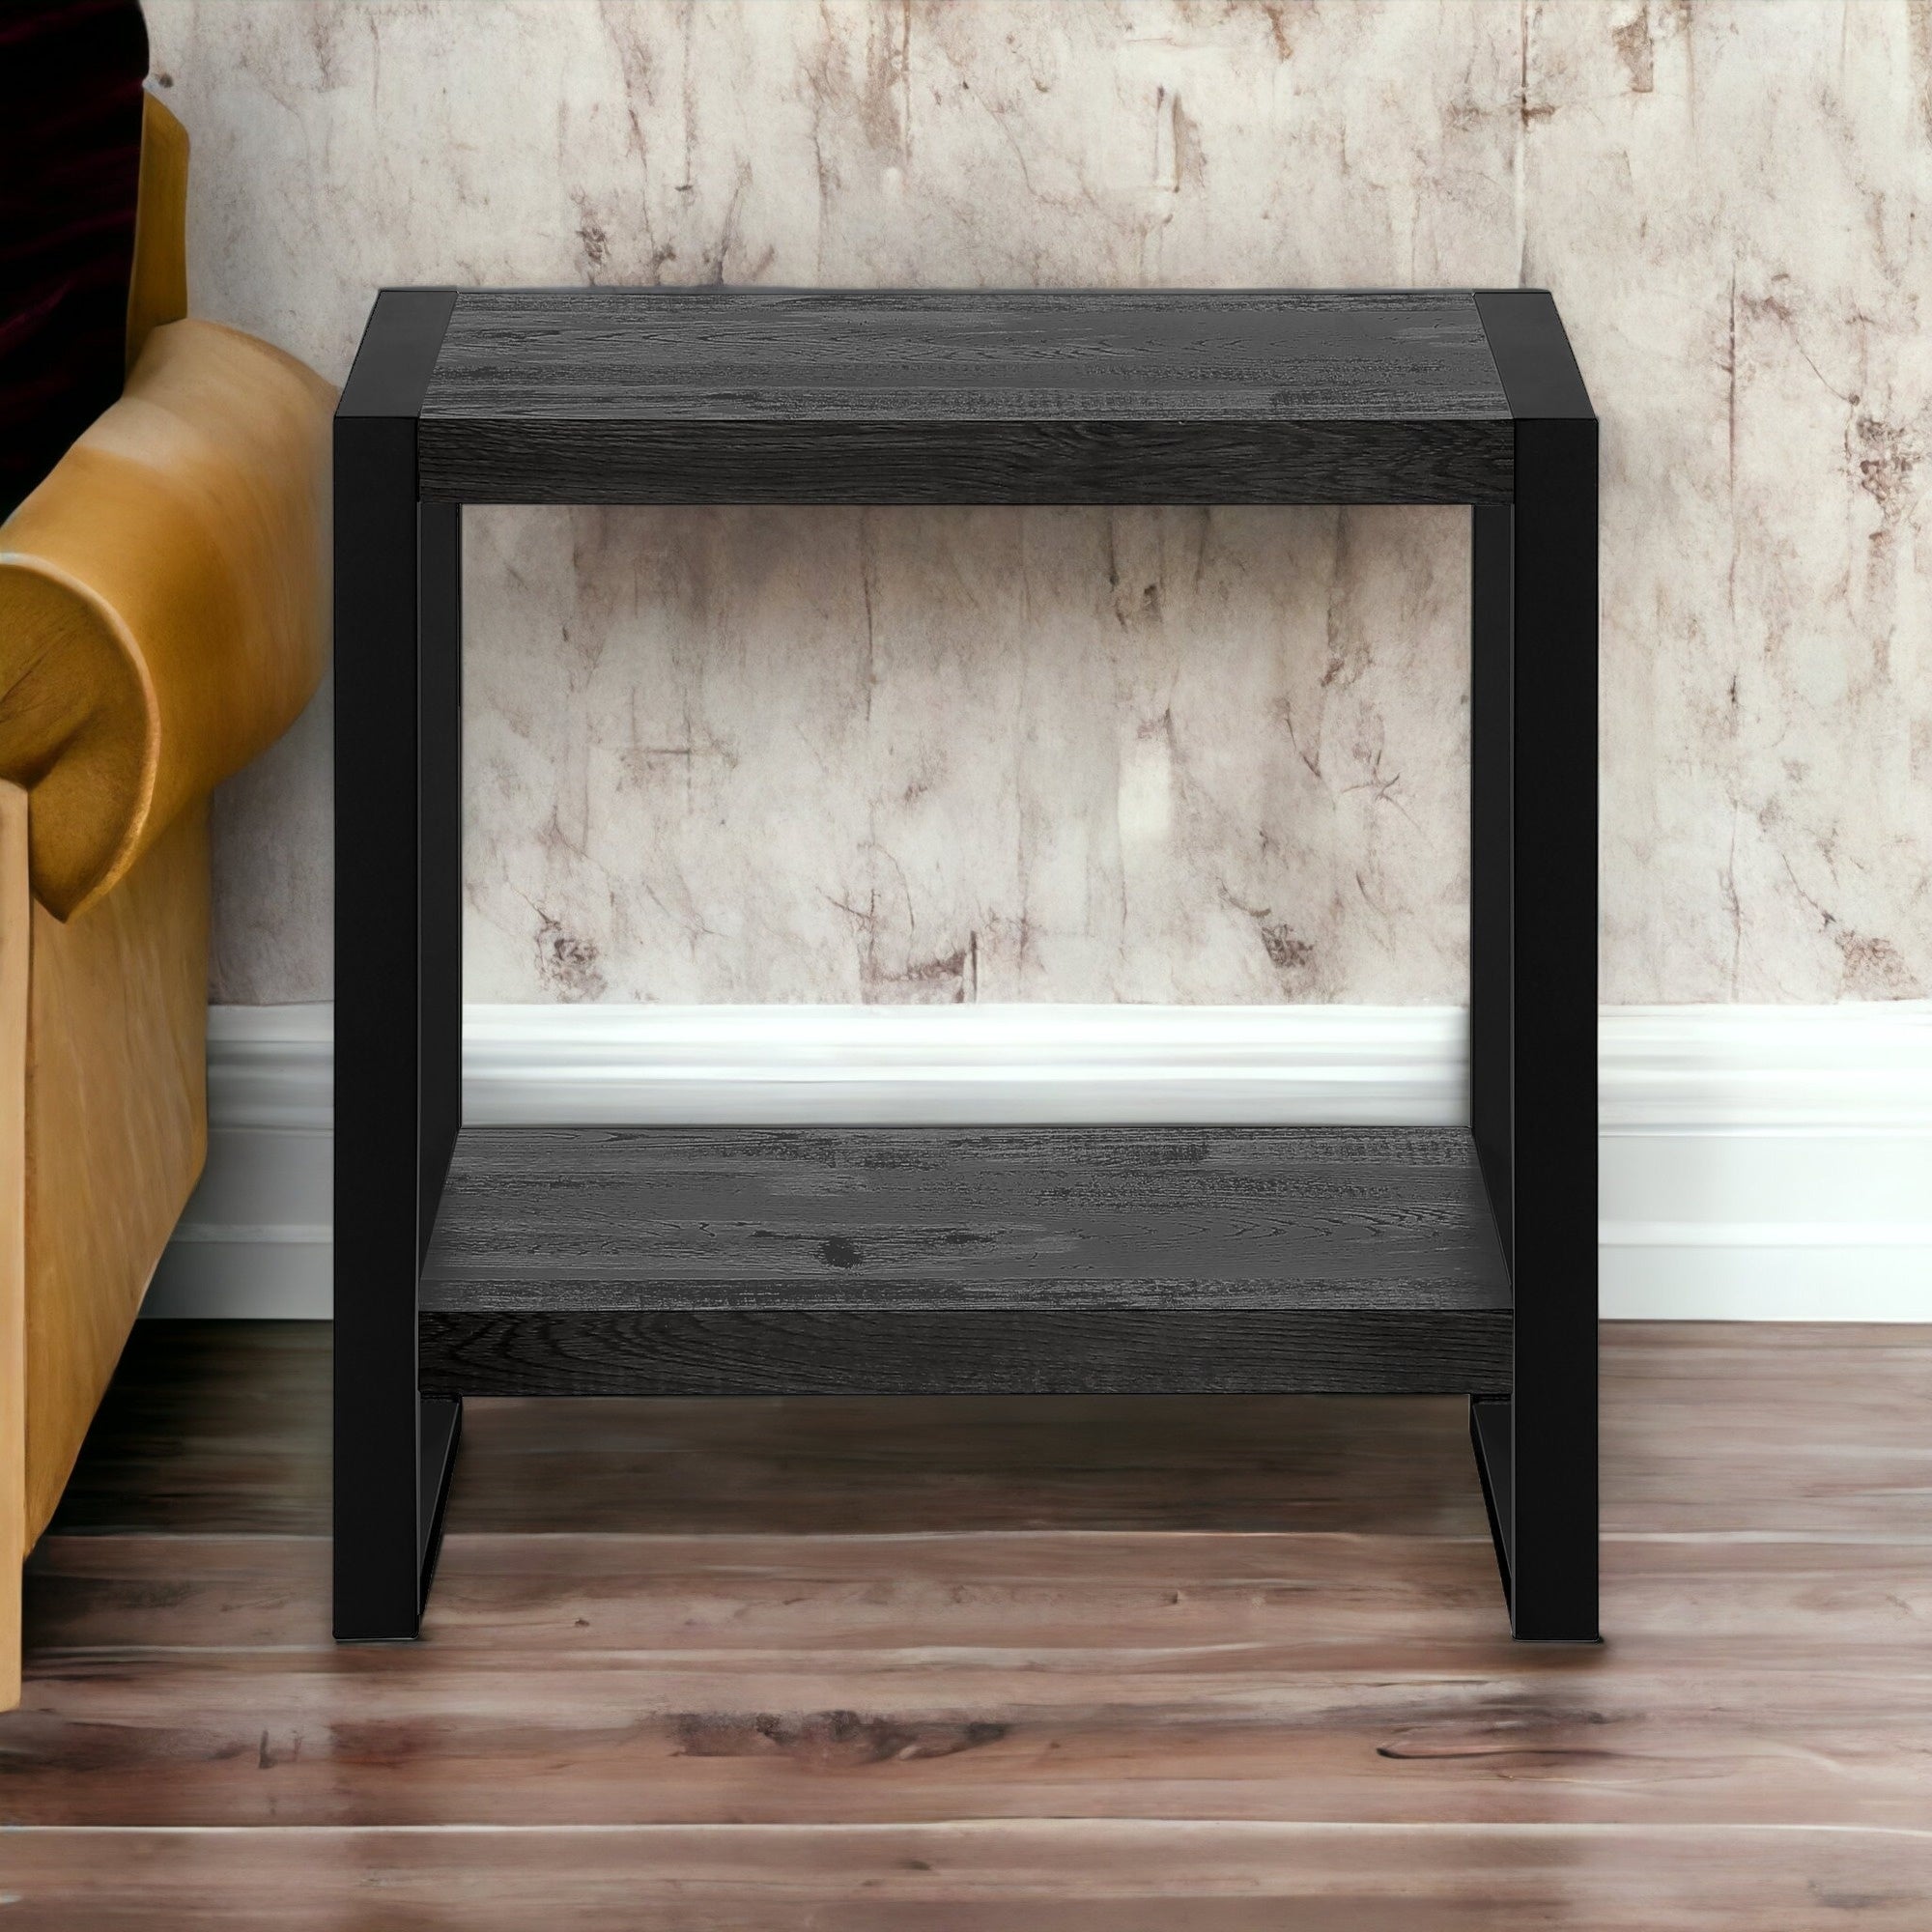 24" Black End Table With Shelf